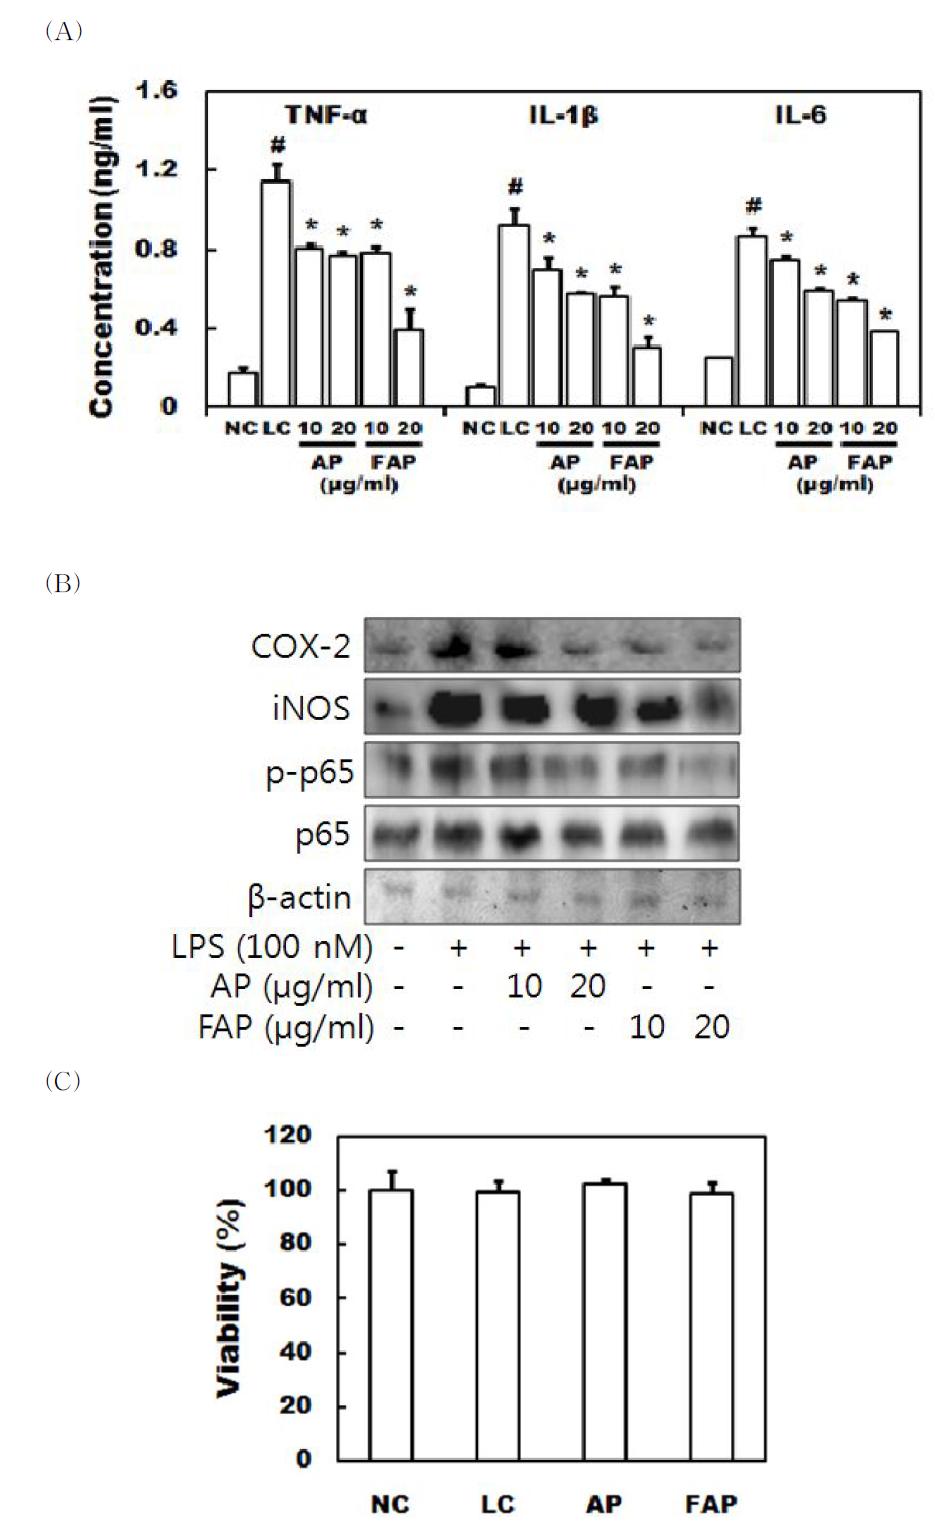 Effects of AP and FAP on the inflammatory mediators in LPS‐stimulated RAW264.7 cells. LPS‐treated group (LC) received the vehicle alone instead of test agents. - 49 - Normal control group (NC) received the vehicle alone instead of LPS and test agents. (A) Effect on proinflammatory cytokines expression. After 20‐h incubation with LPS in absence or presence of AP or FAP (10 and 20 μM), TNF‐α, IL‐1β and IL‐6 in the culture medium was measured using ELISA kit. (B) Effect on COX‐2 and iNOS expression and NF‐κB activation. These were measured by immunoblot analysis after incubation with LPS in absence or presence of AP or FAP (10 and 20 μg/ml) for 20 h. Cytotoxicity of AP and FAP (20 μg/ml) in the presence of LPS (100 ng/ml). (C) Cytotoxicity. Cell viability was measured with crystal violet. Each value is expressed as the mean ± S.D. (n=6). *P < 0.05 compared with the control